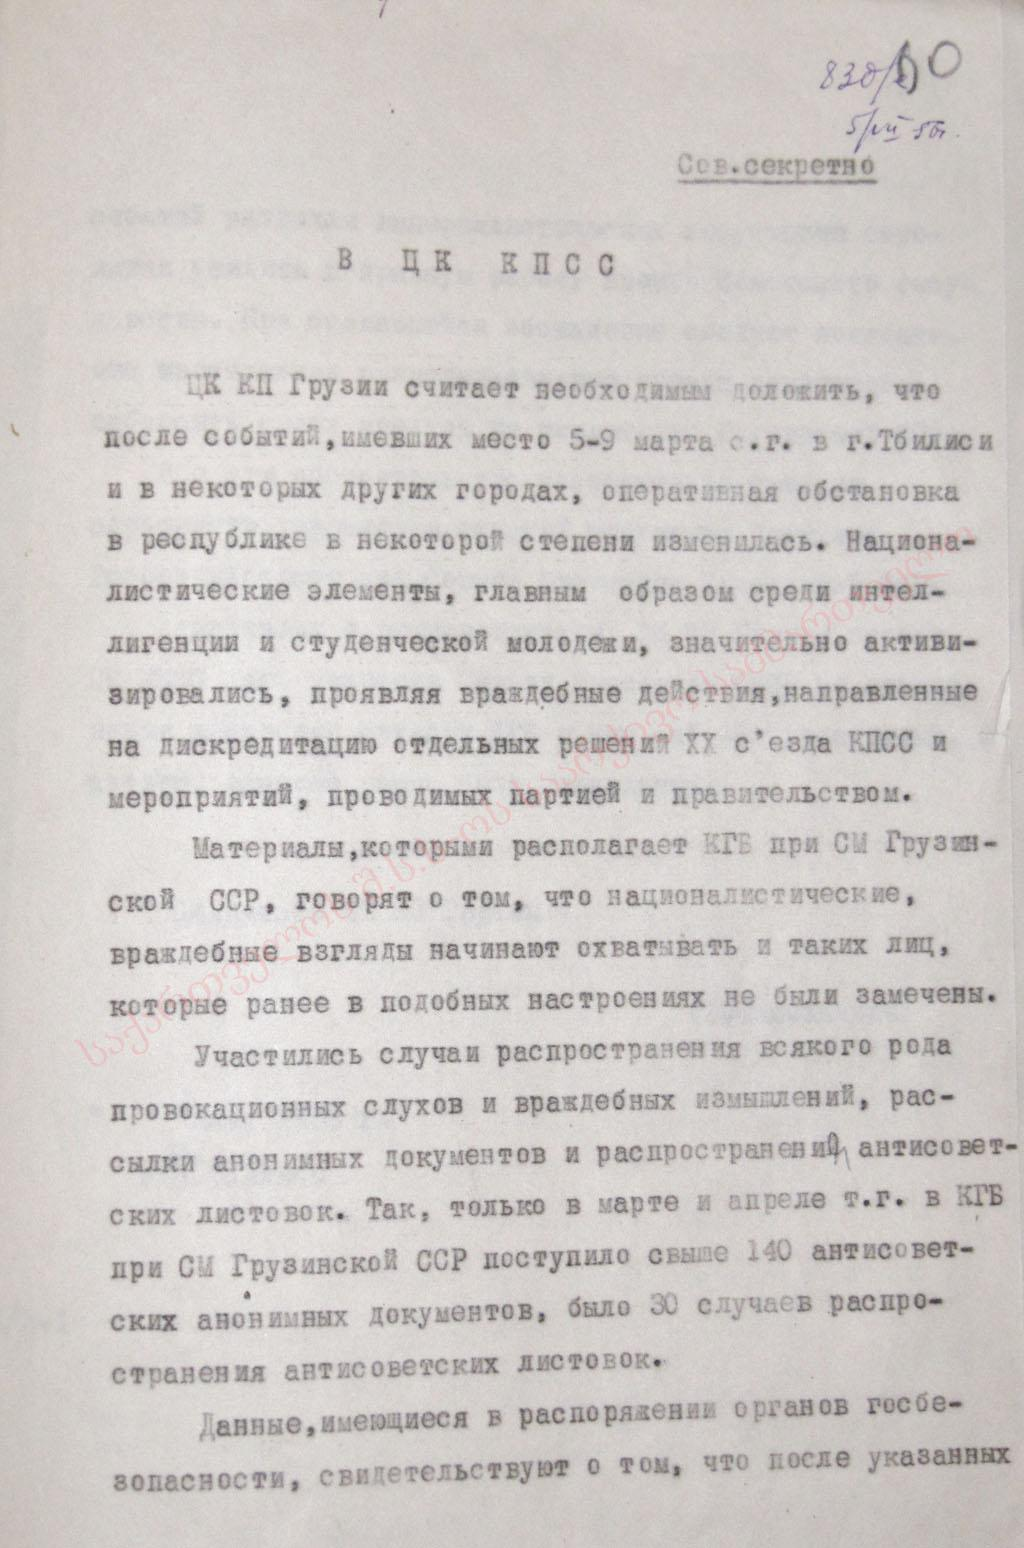 The First Secretary of the Central Committee of Georgia Vasil Pavlovich Mzhavanadze informs the Division of the Party Organs of the Union Republics at the Central Committee of the USSR about the participation of the communist in the demonstrations of March 5-9, 1956 and measures of punishment that were taken against them.